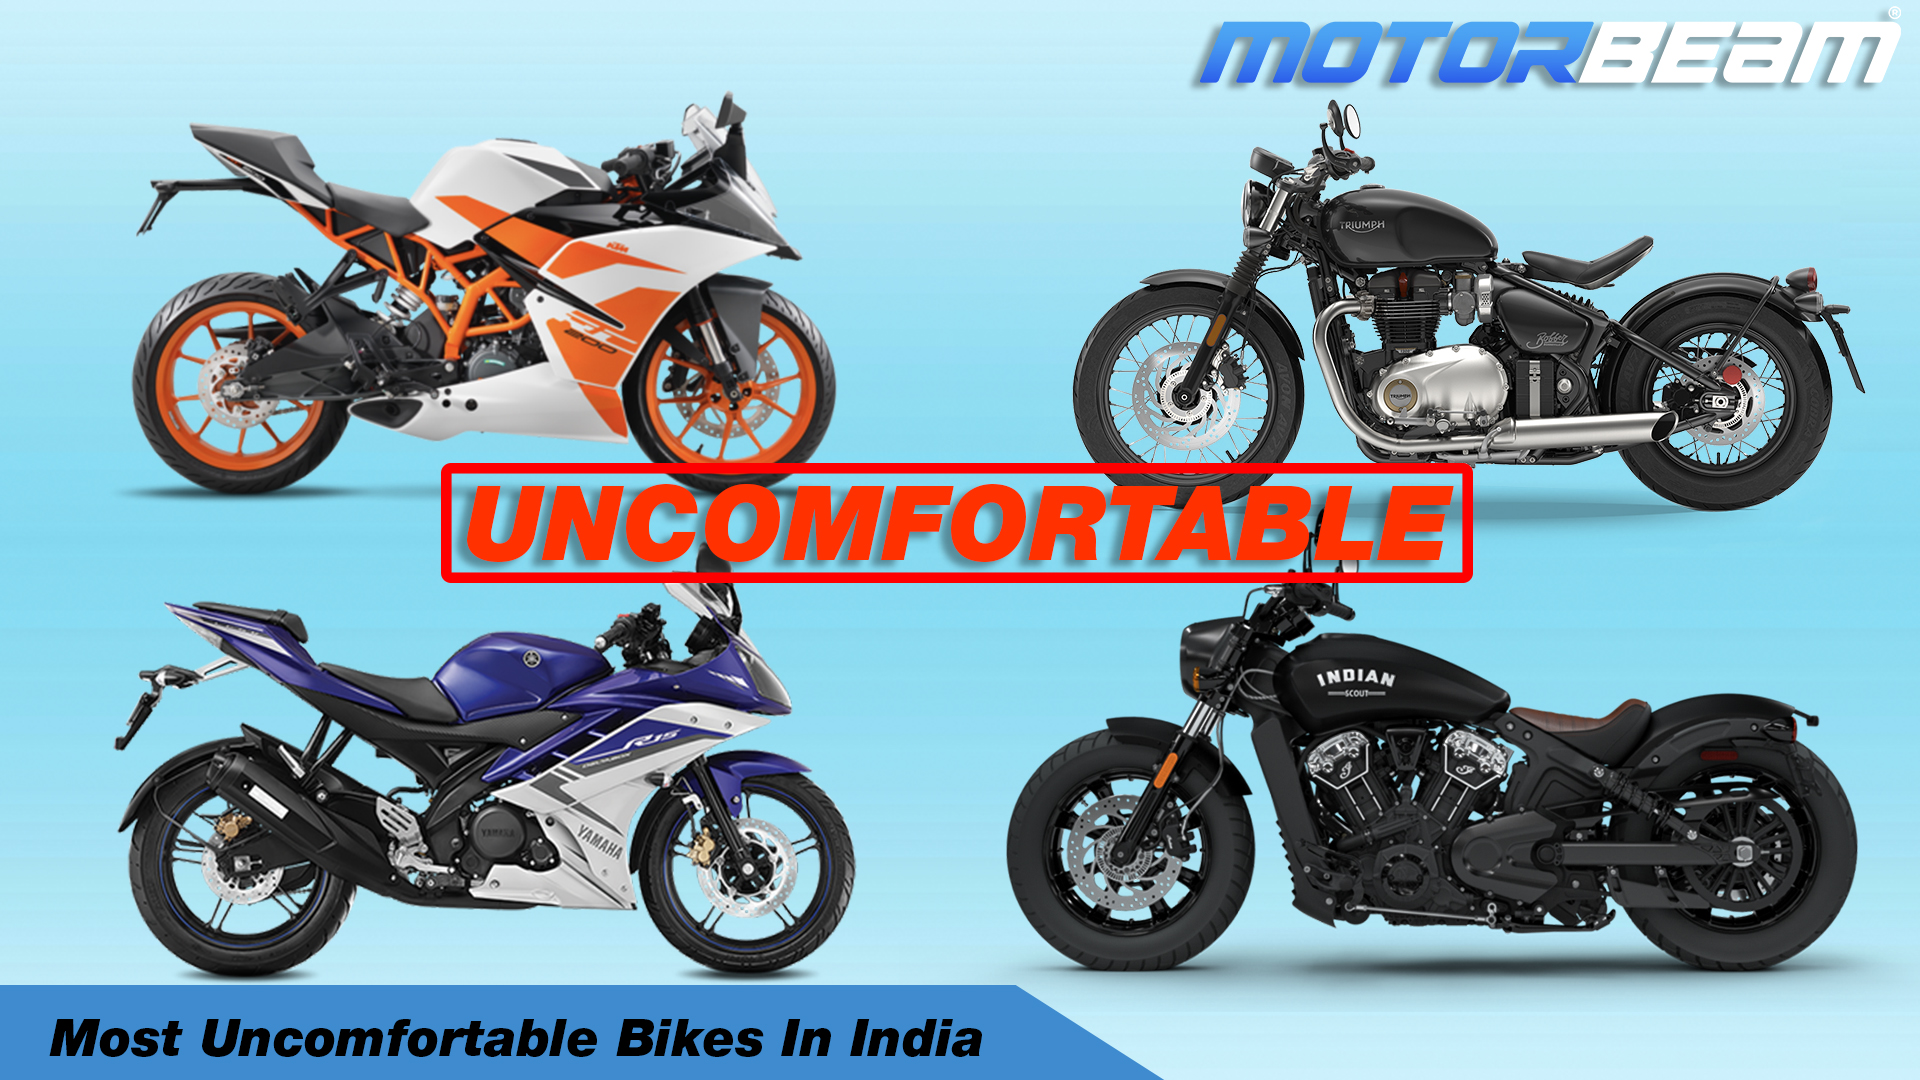 Most Uncomfortable Bikes In India